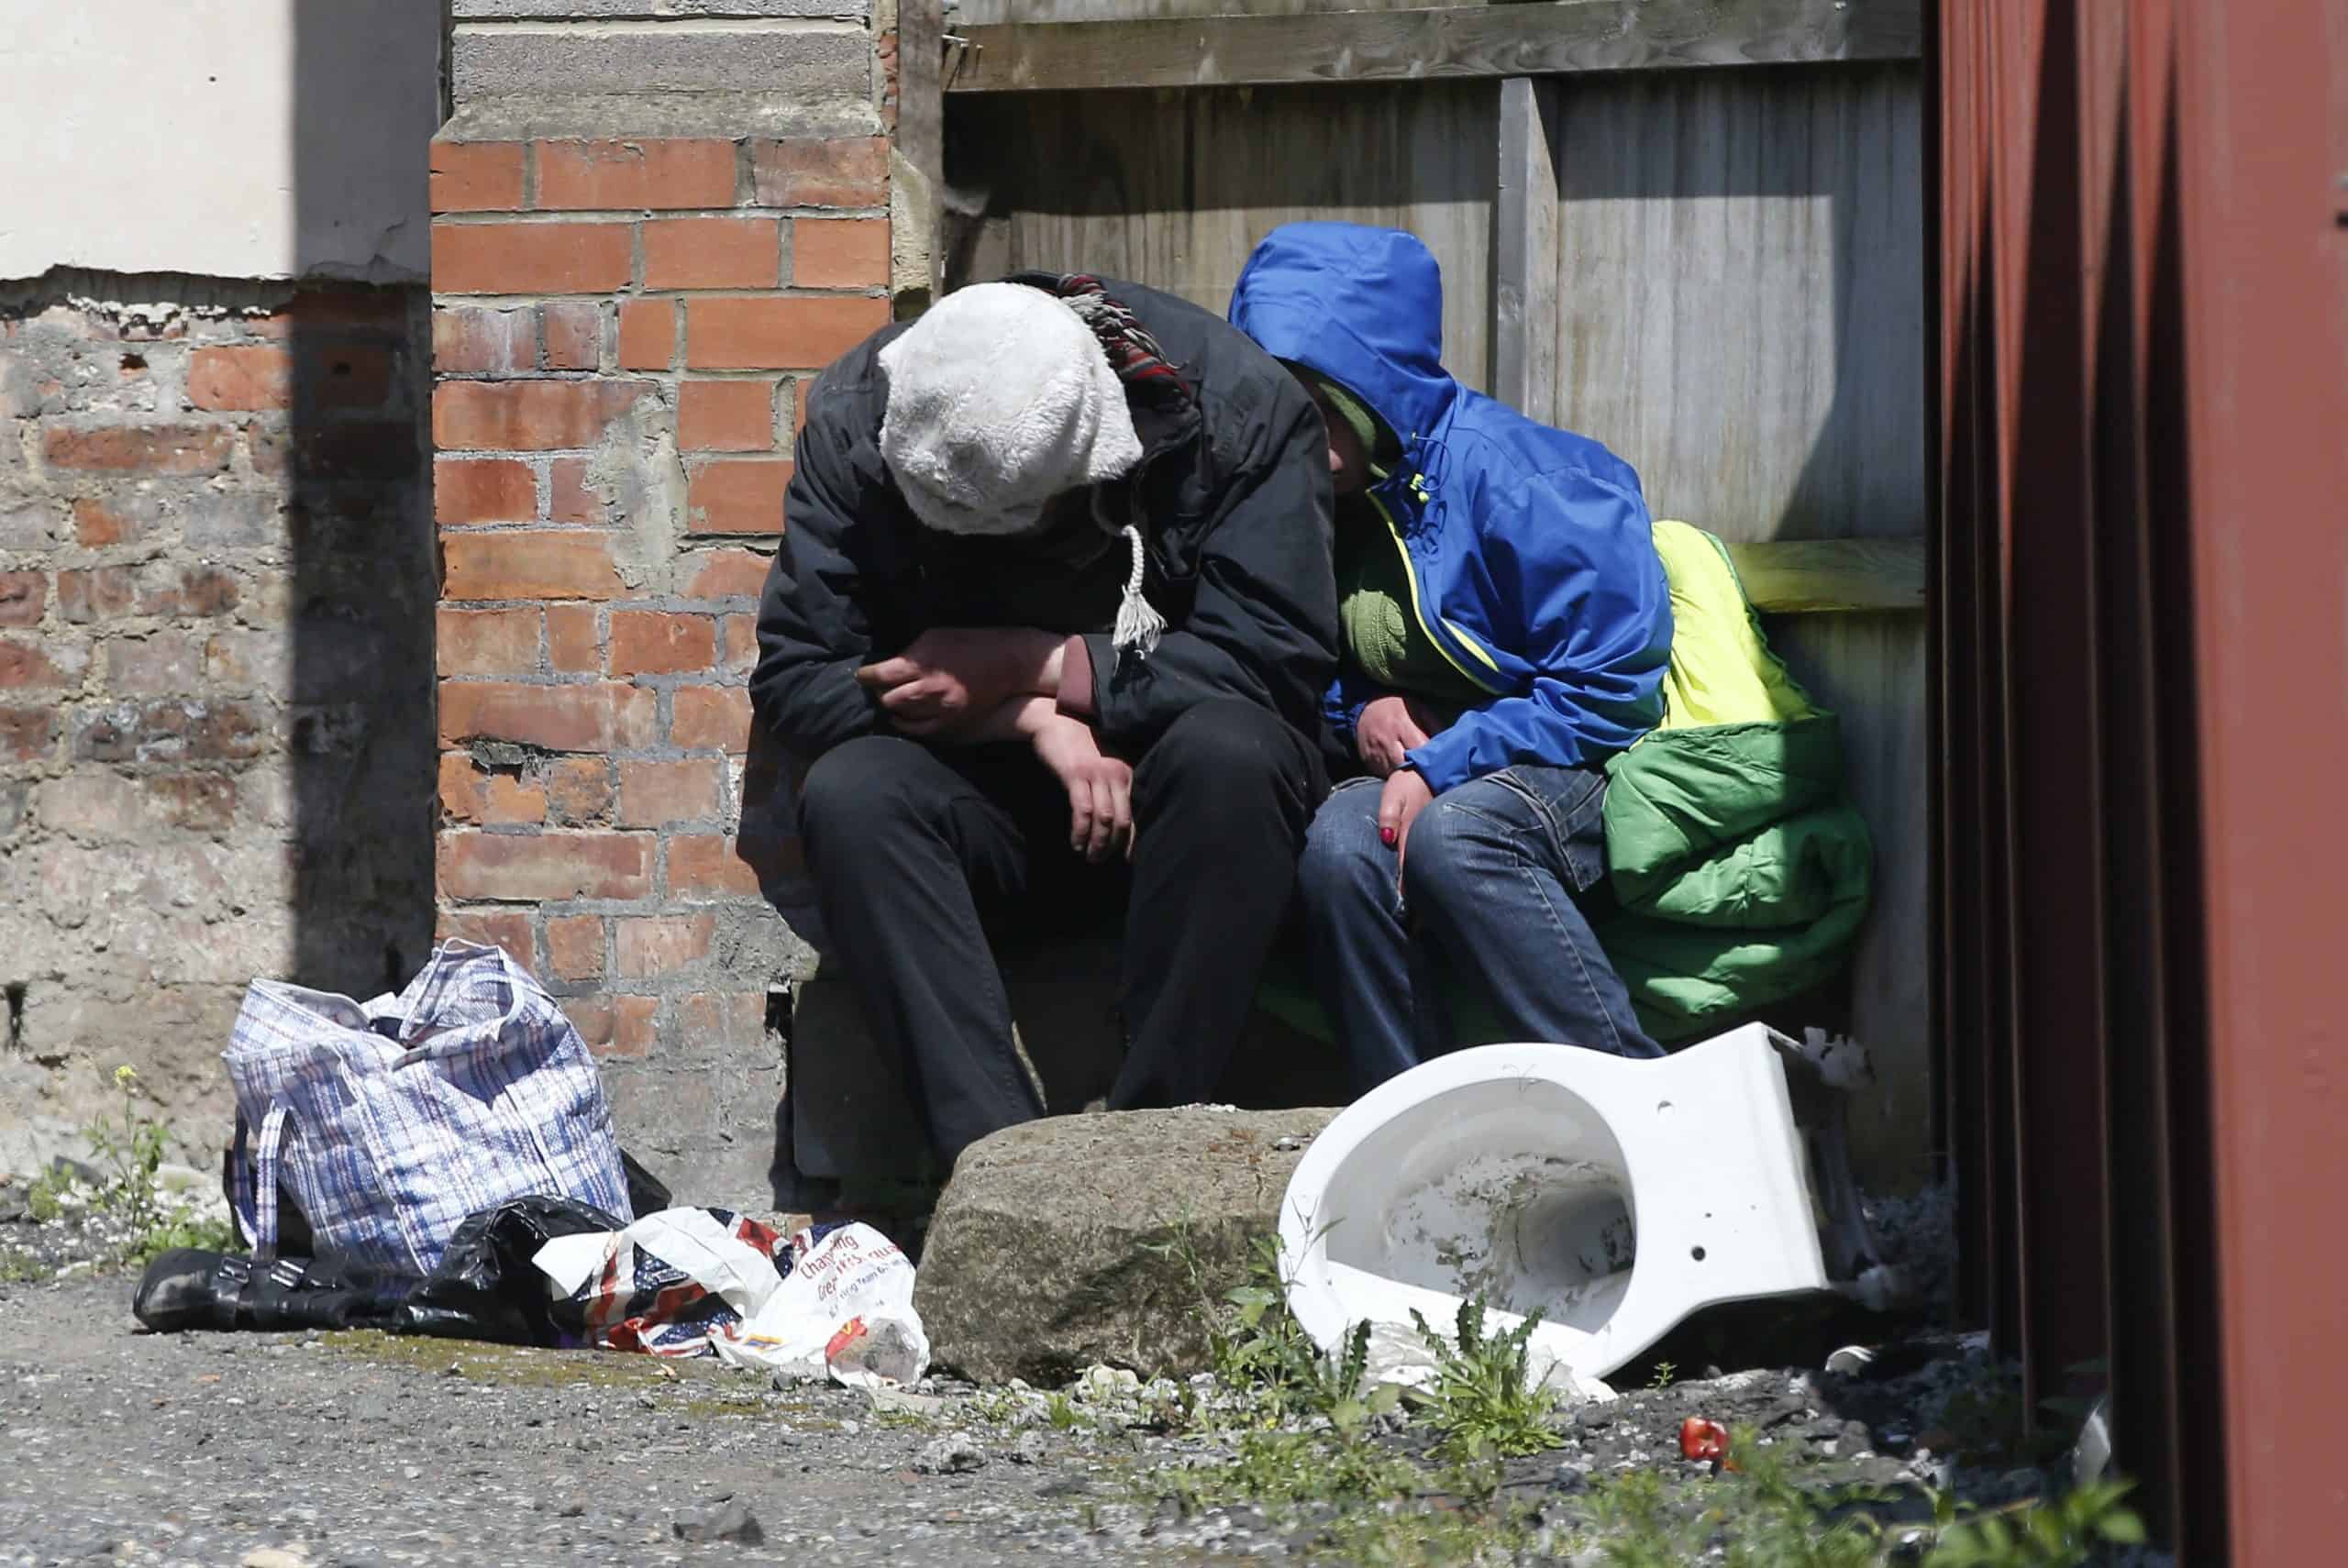 ‘Died without the dignity of a stable home’ as homeless deaths rise for fifth year in row